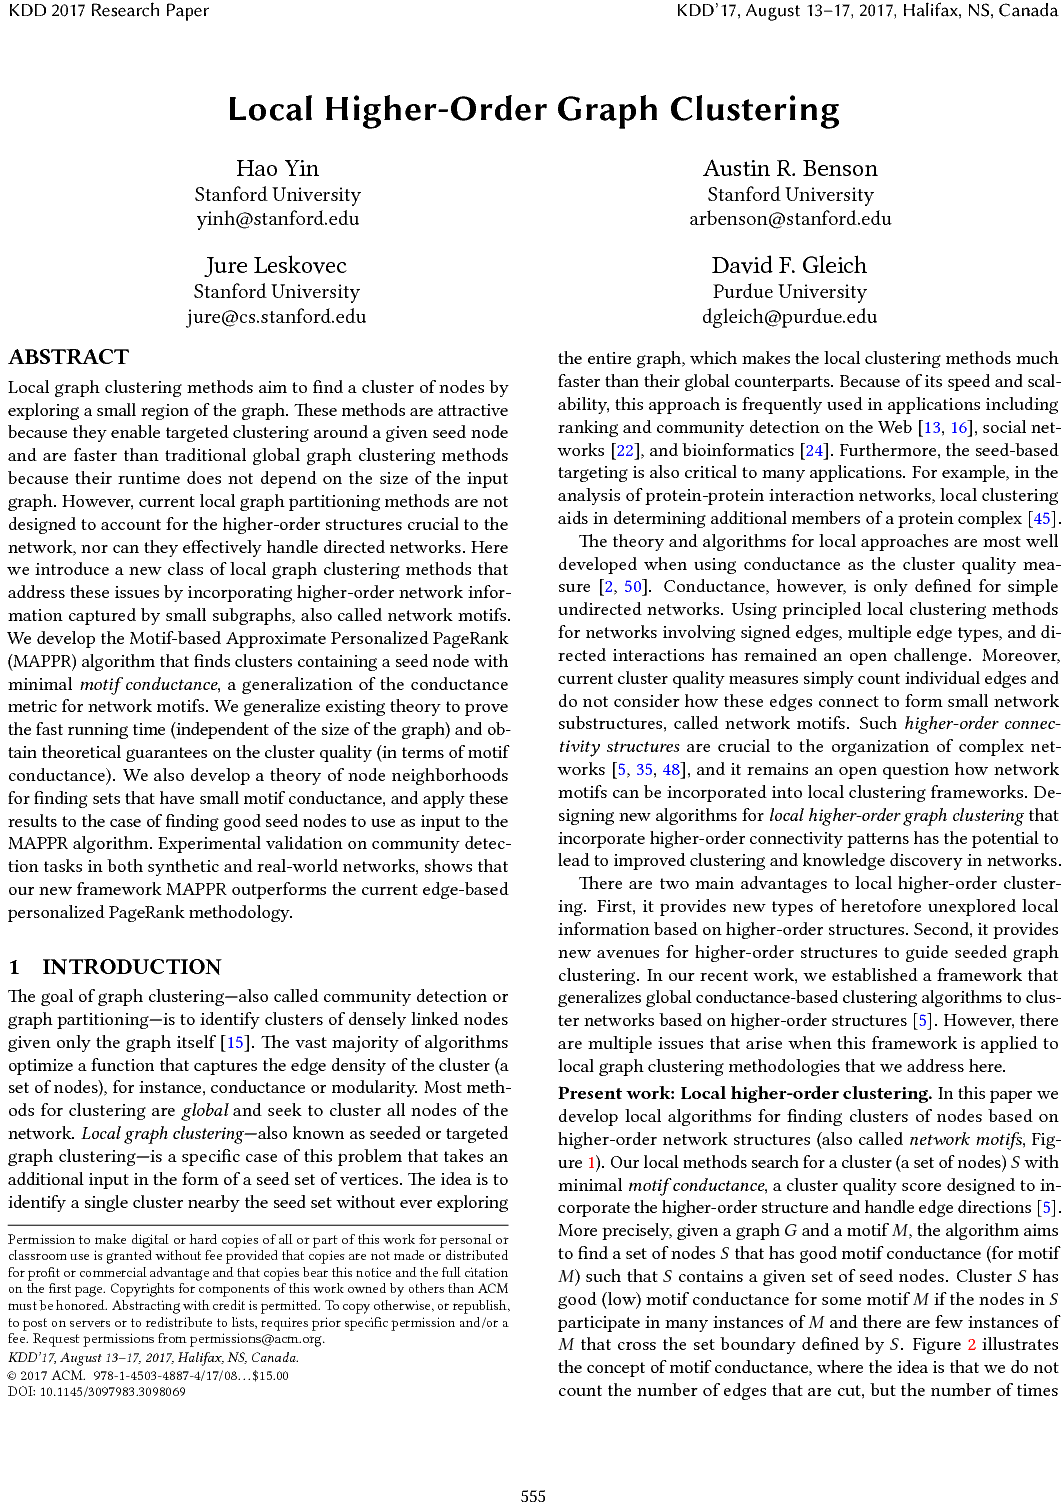 Local Higher-Order Graph Clustering